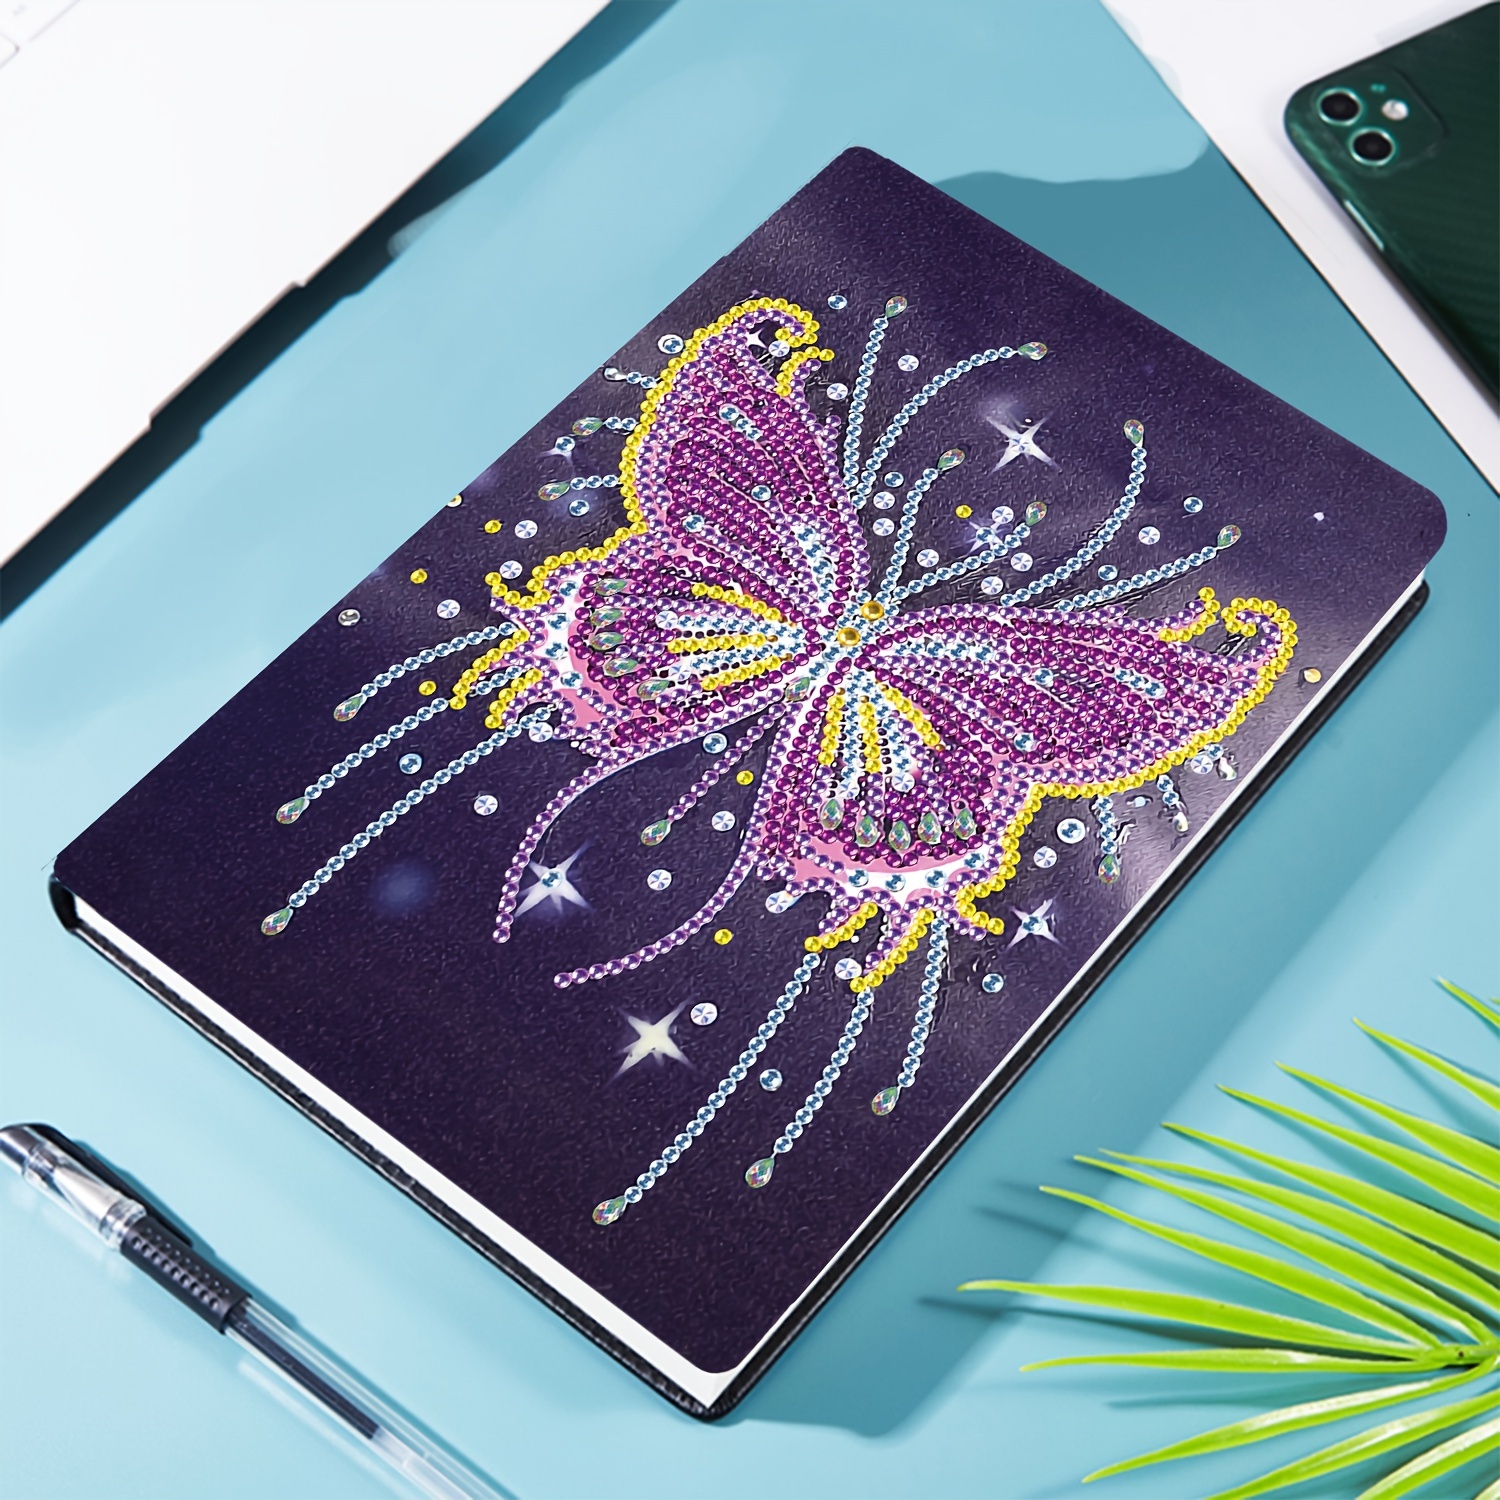 Best Deal for Ingzy DIY Special Diamond Painting Notebook,5D Round